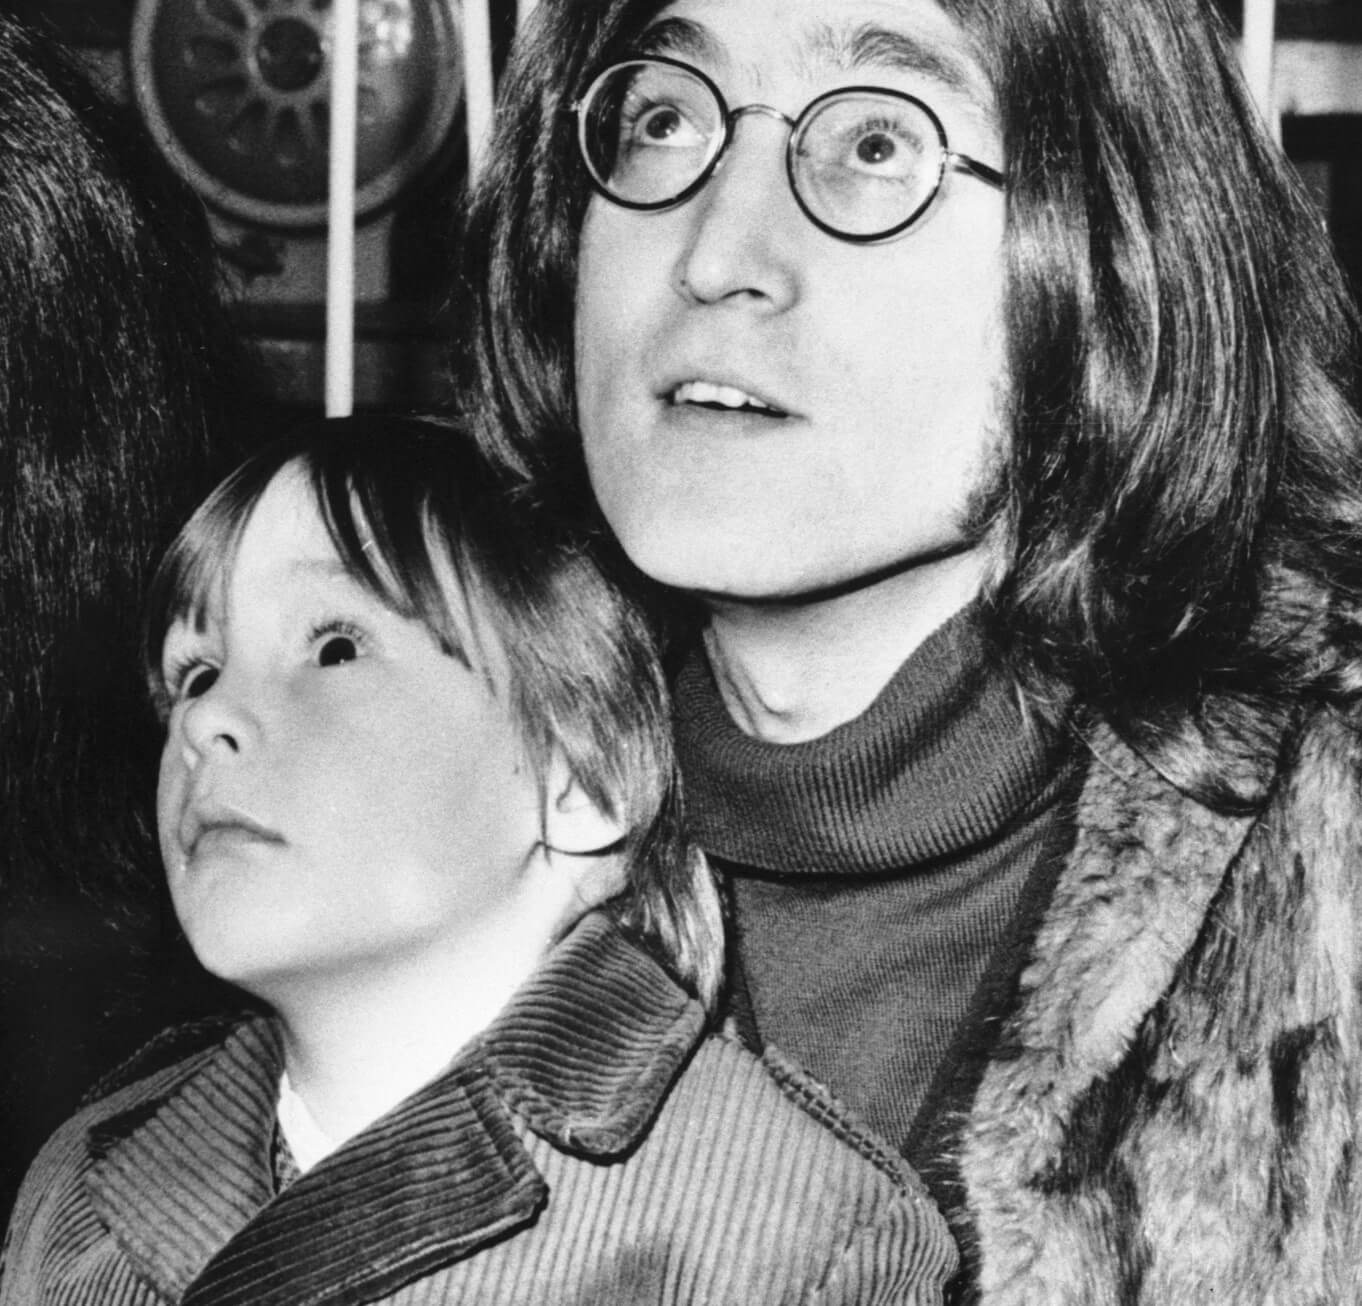 John Lennon's Son's 1st Musical Memory Has Nothing to Do With The Beatles